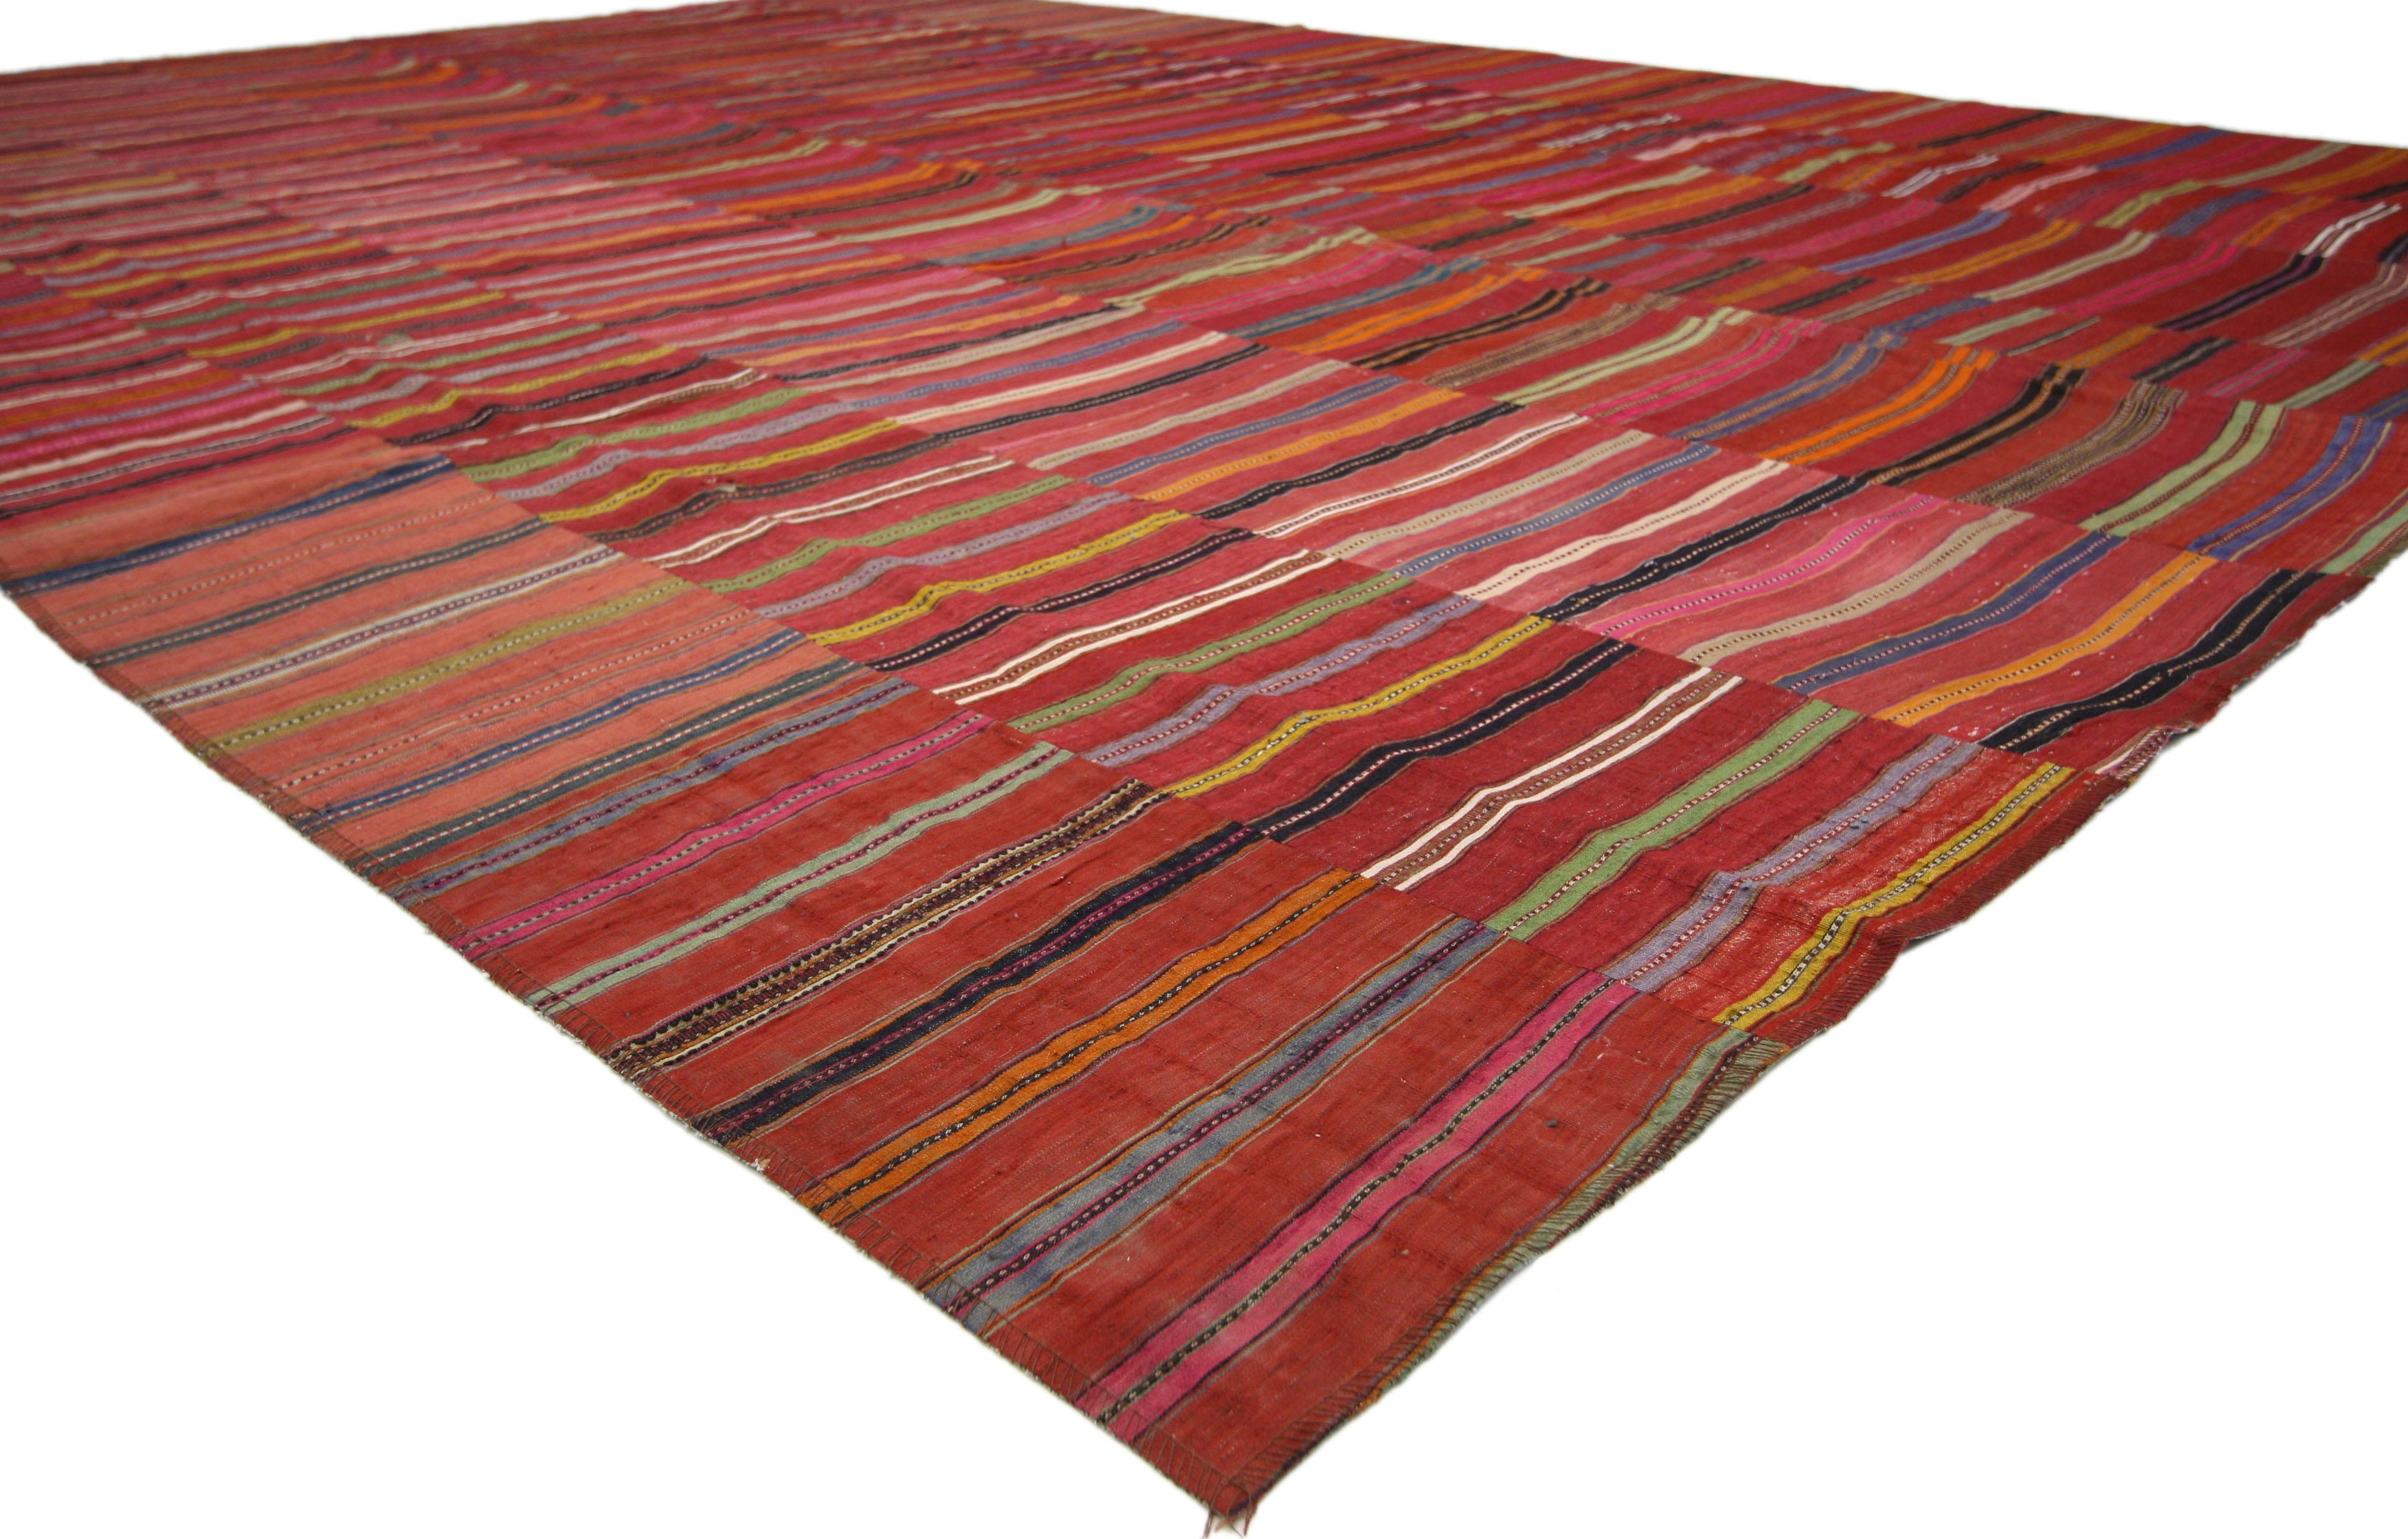 60650 Distressed Vintage Turkish Kilim Rug with Bayadere Stripes and Rustic Style, Striped Kilim Area Rug. This handwoven wool vintage Turkish Kilim Jajim Kilim rug features a variety of colorful Bayadere stripes composed of both wide and narrow